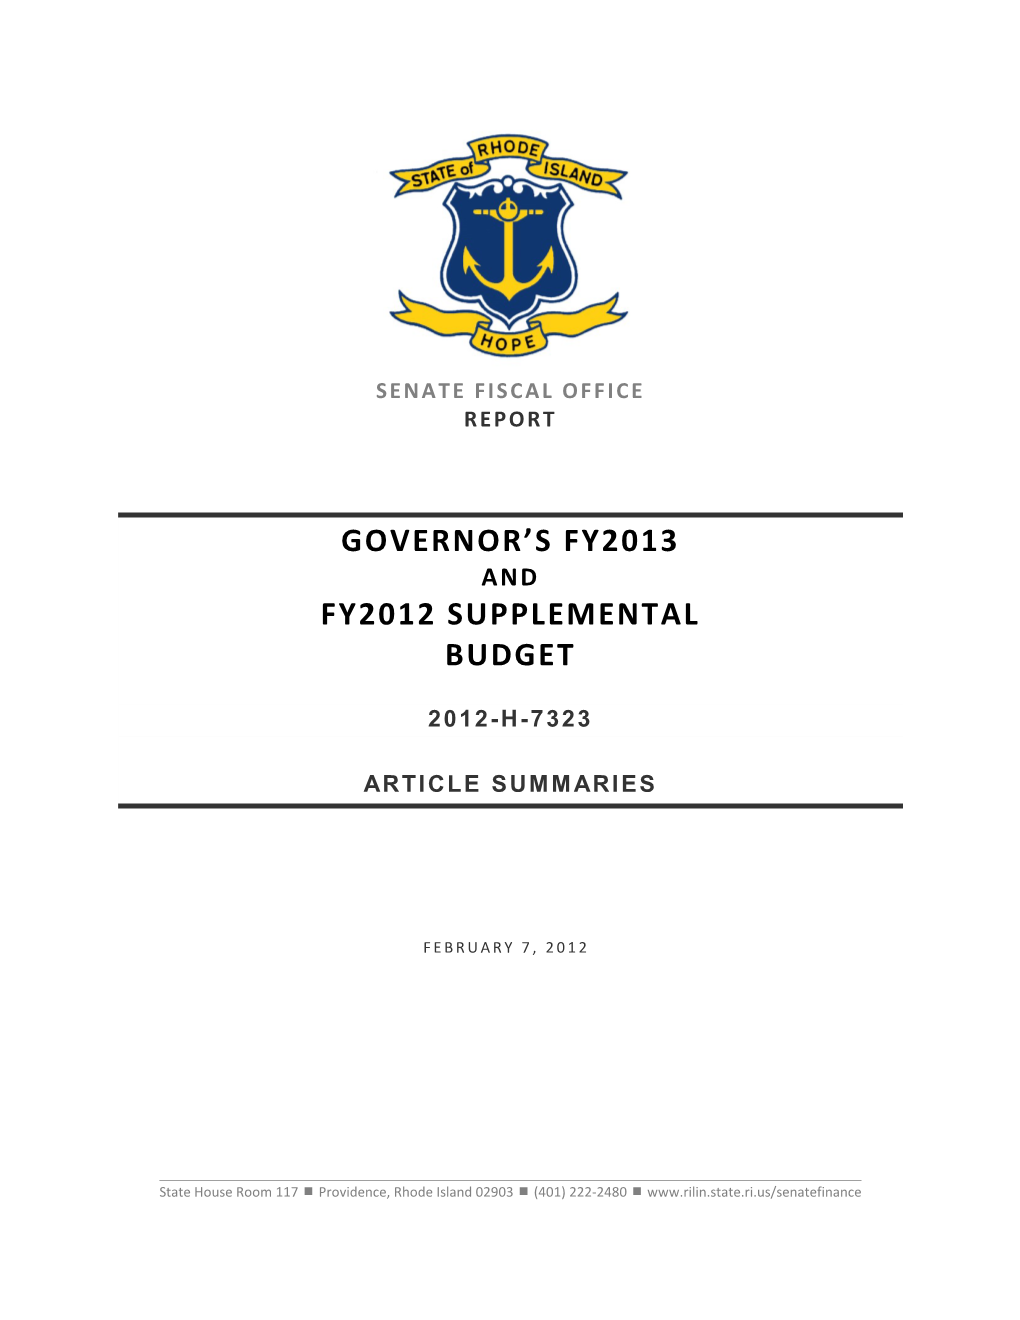 Governor's FY2013 Budget Articles